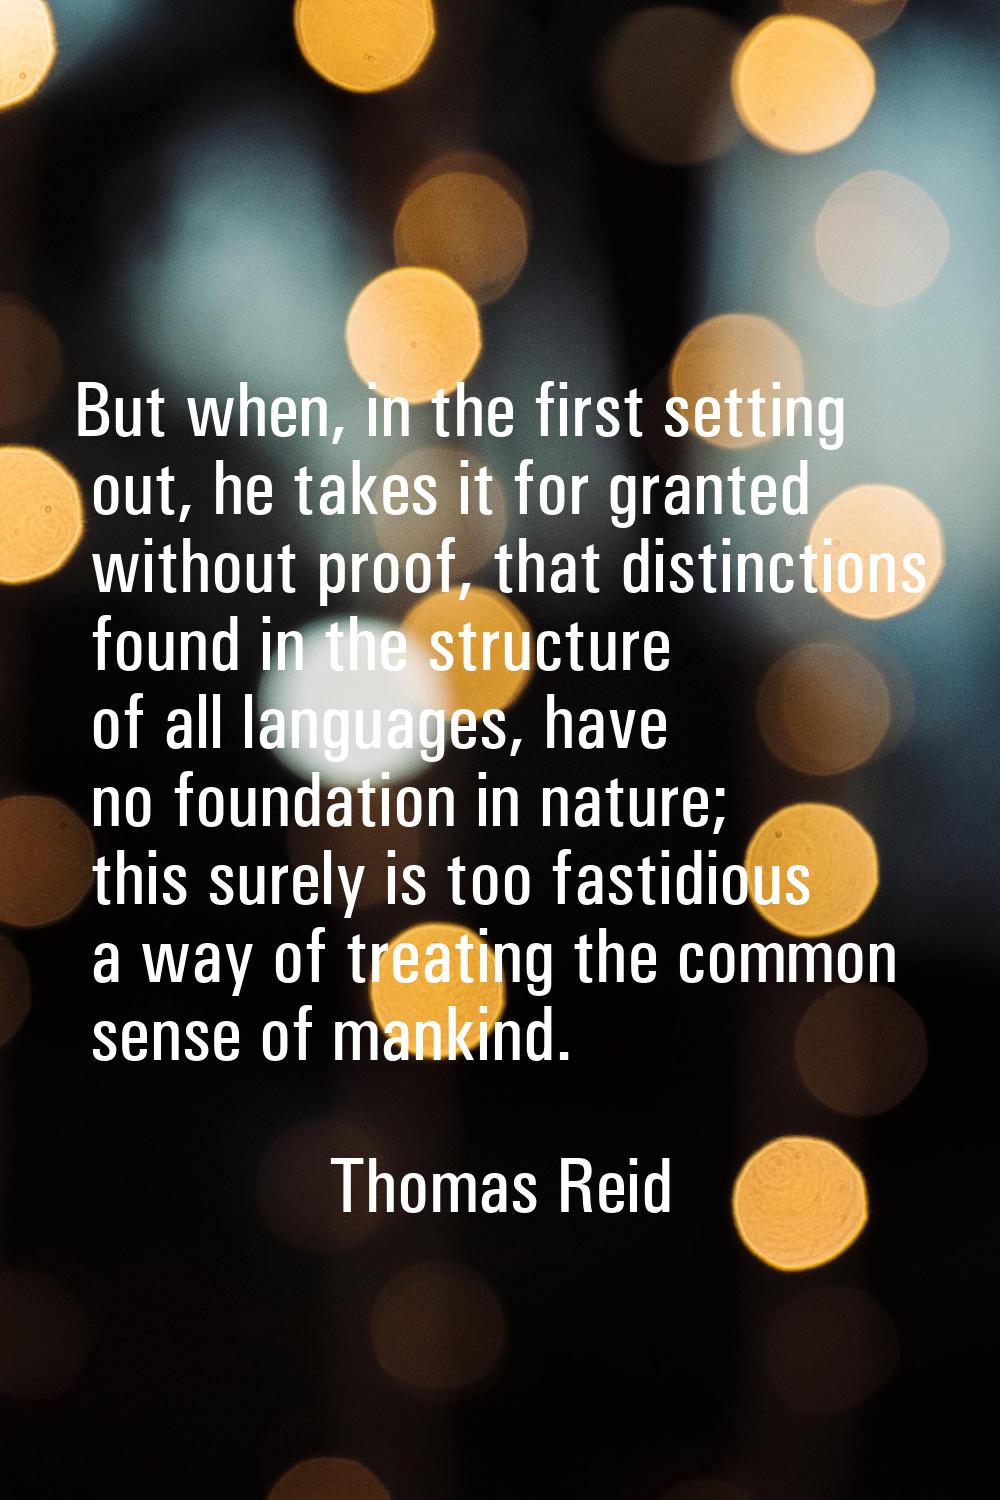 But when, in the first setting out, he takes it for granted without proof, that distinctions found 